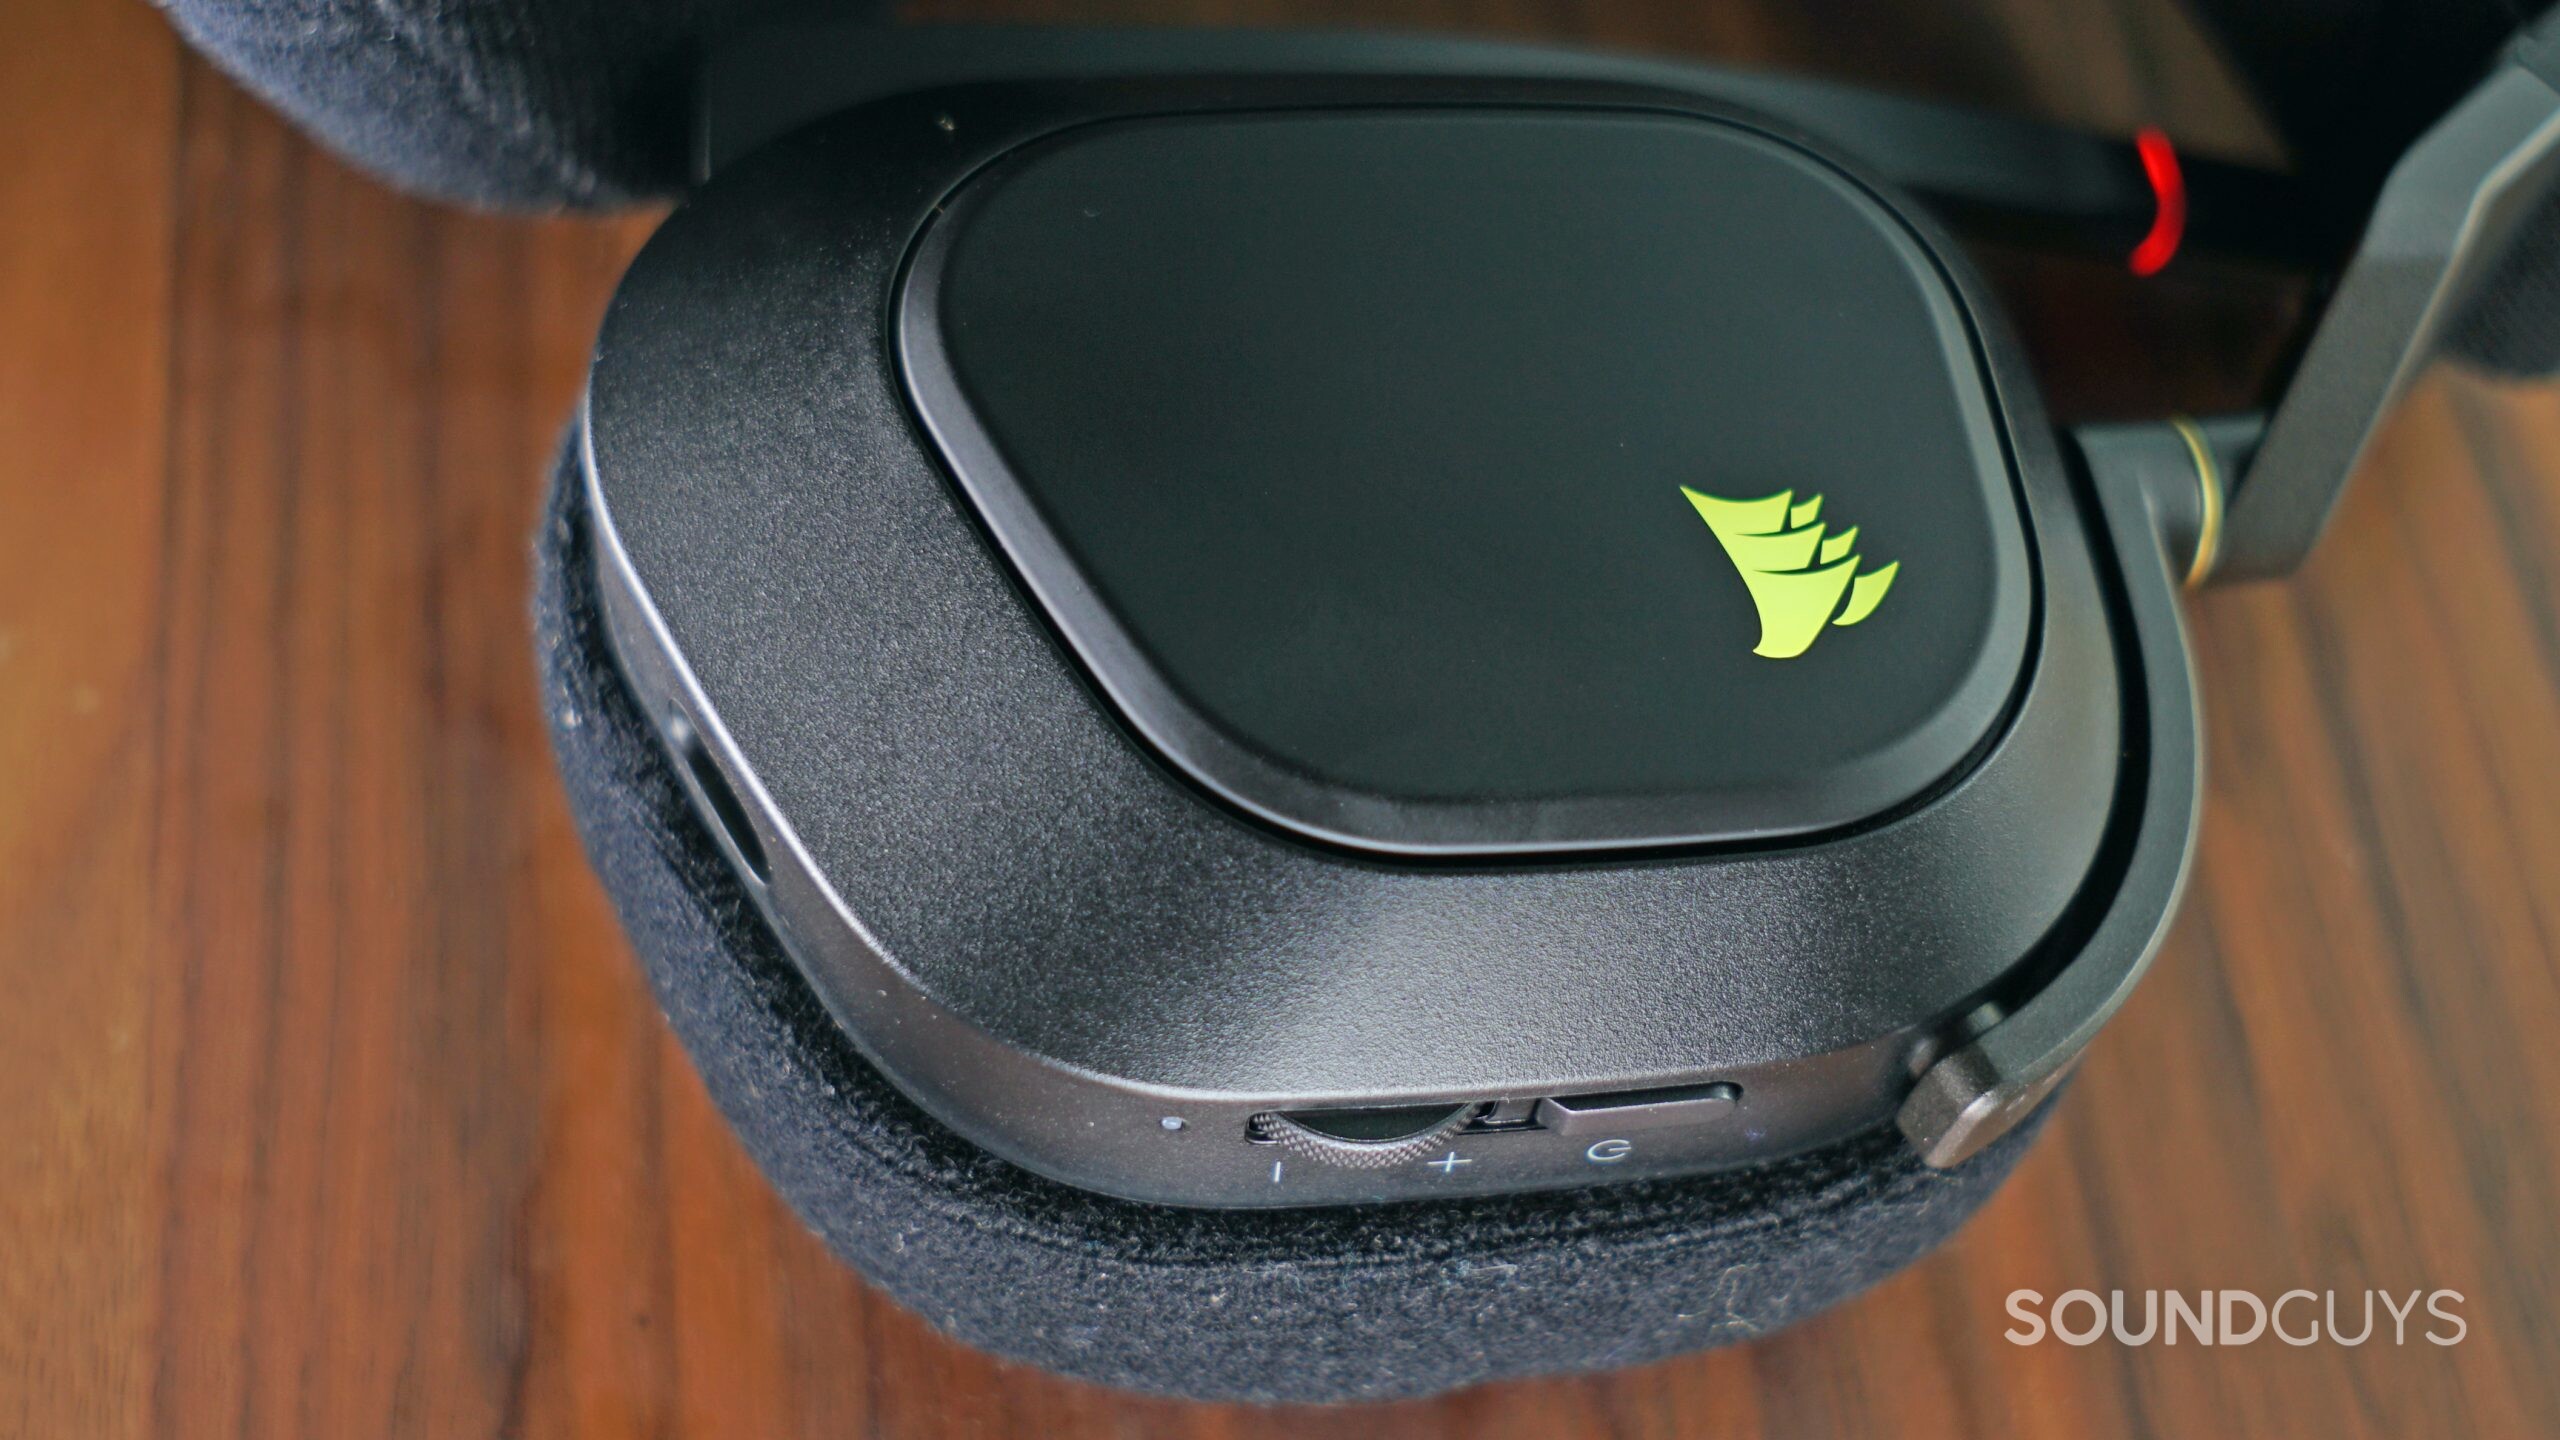 Corsair HS80 RGB Wireless Gaming Headset Review - Spatial Audio FTW